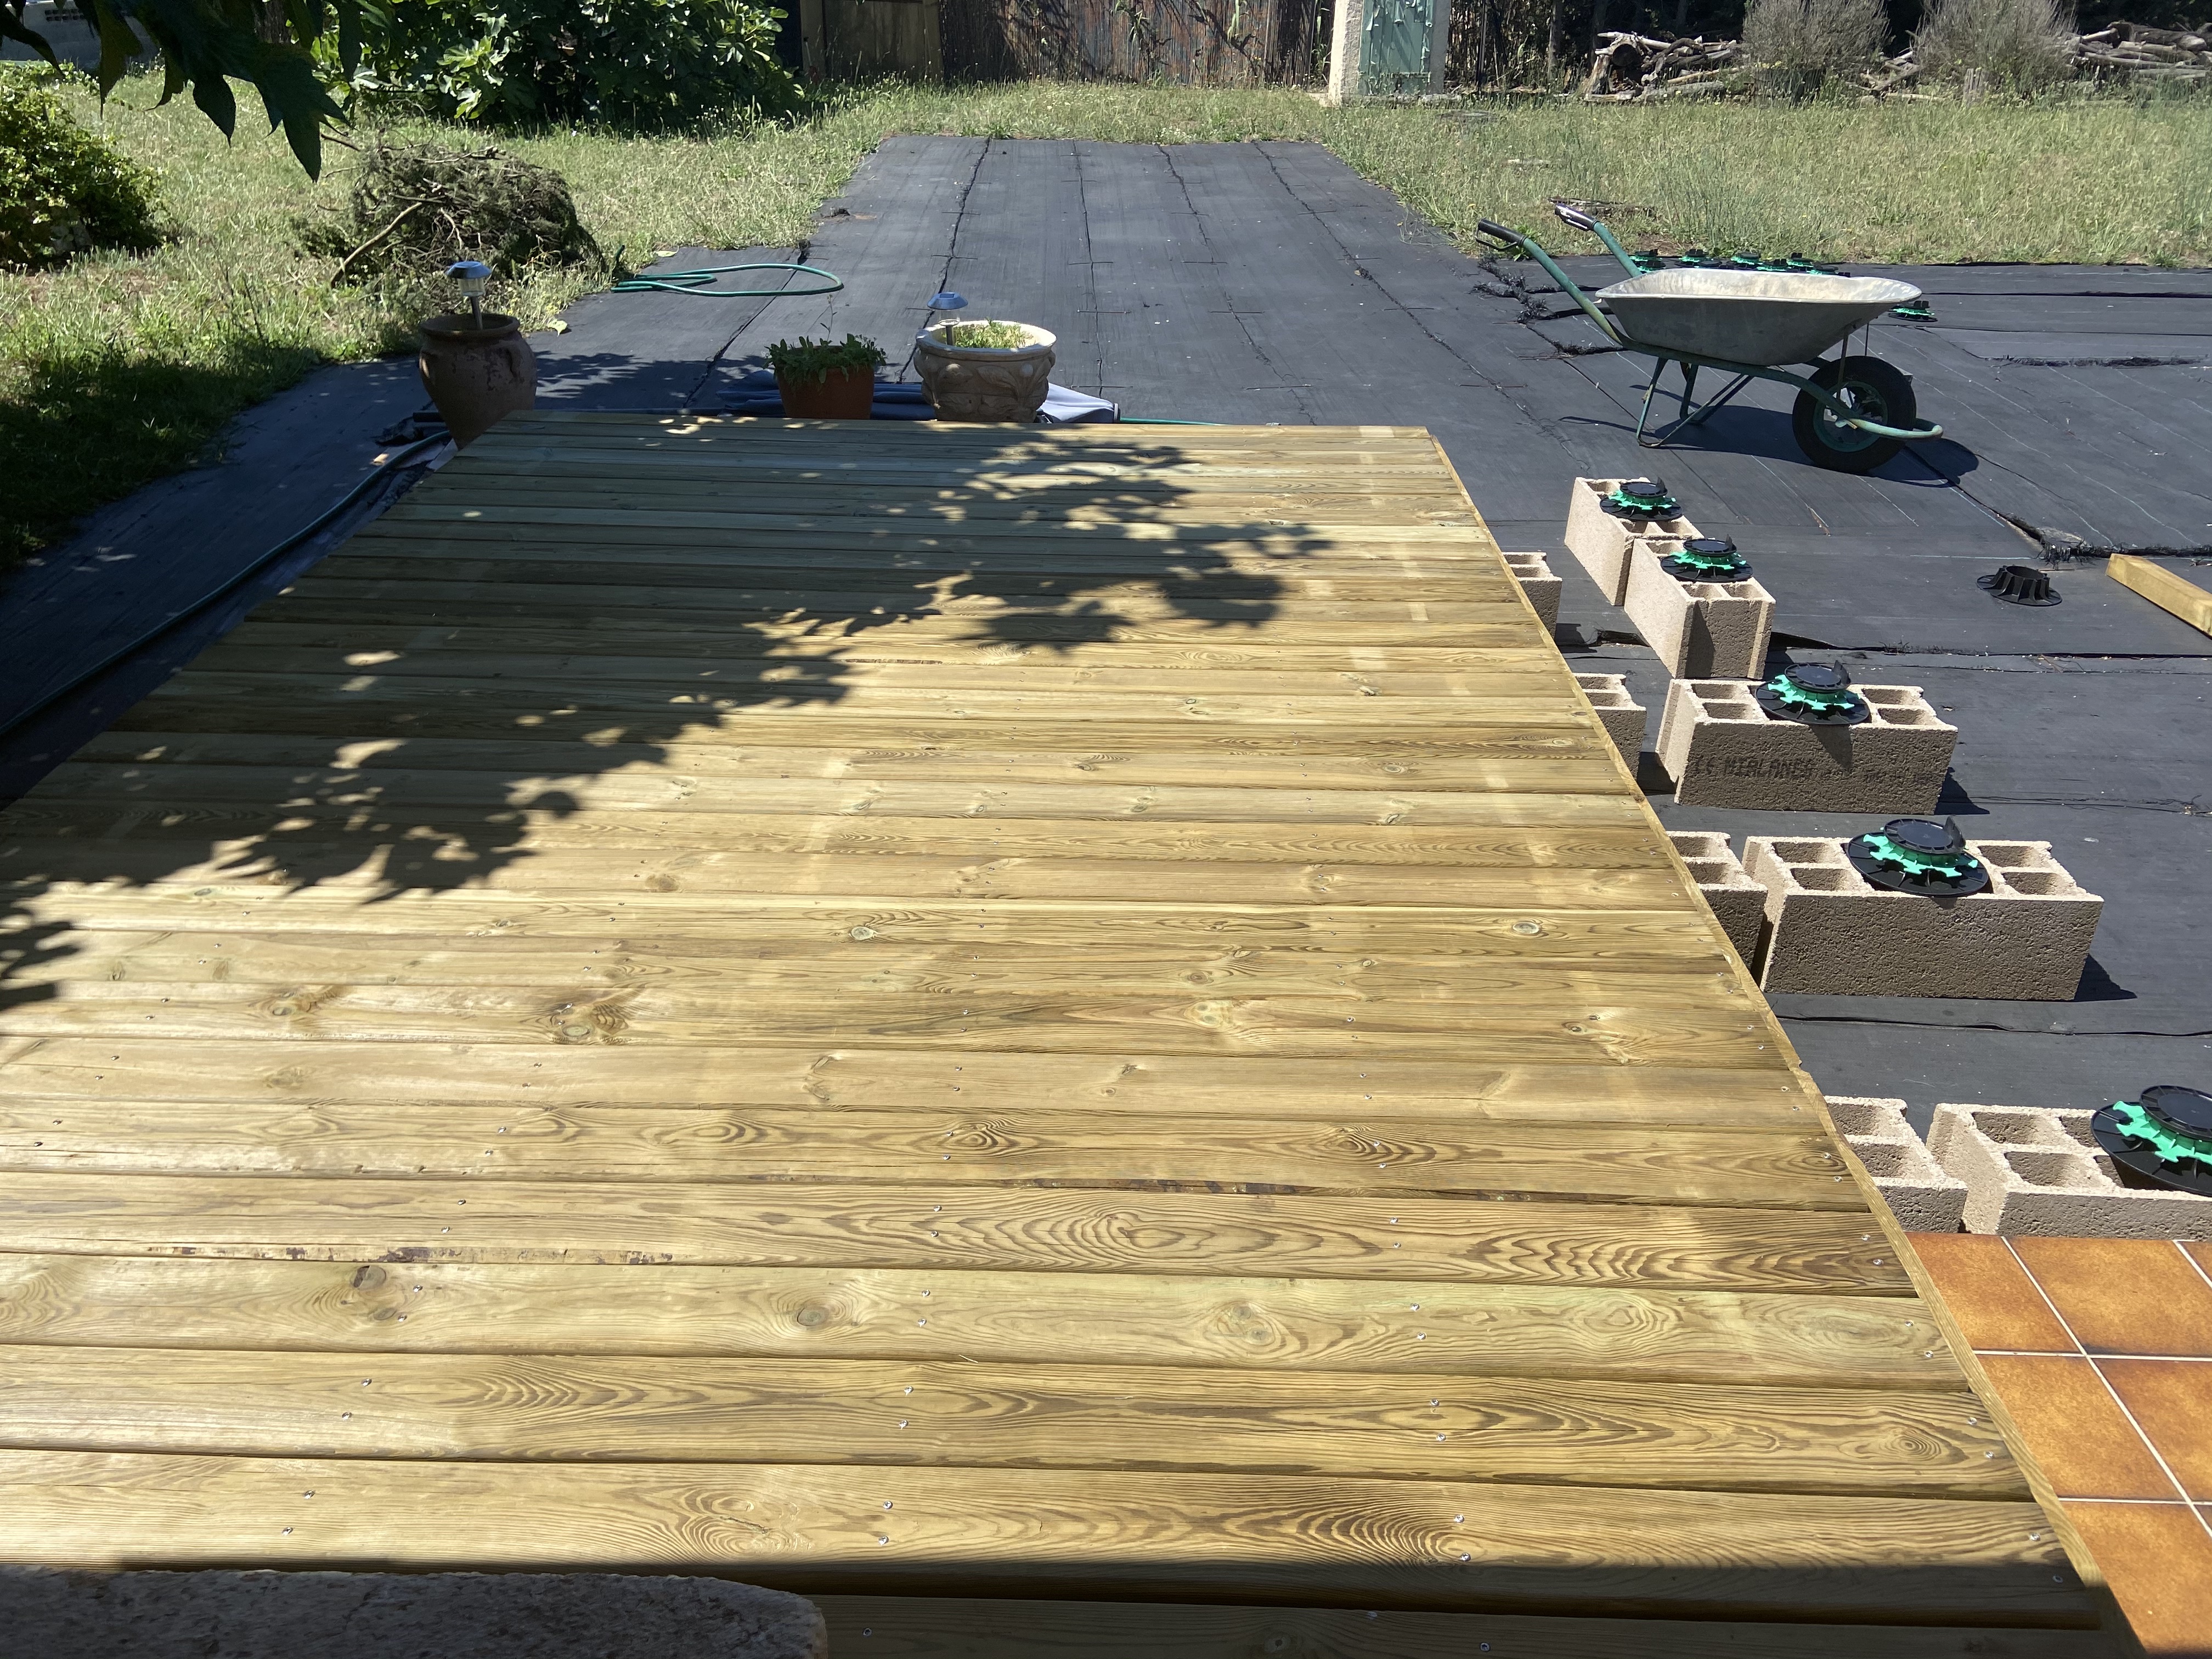 Finished the first 2.5m by 4m decking section.